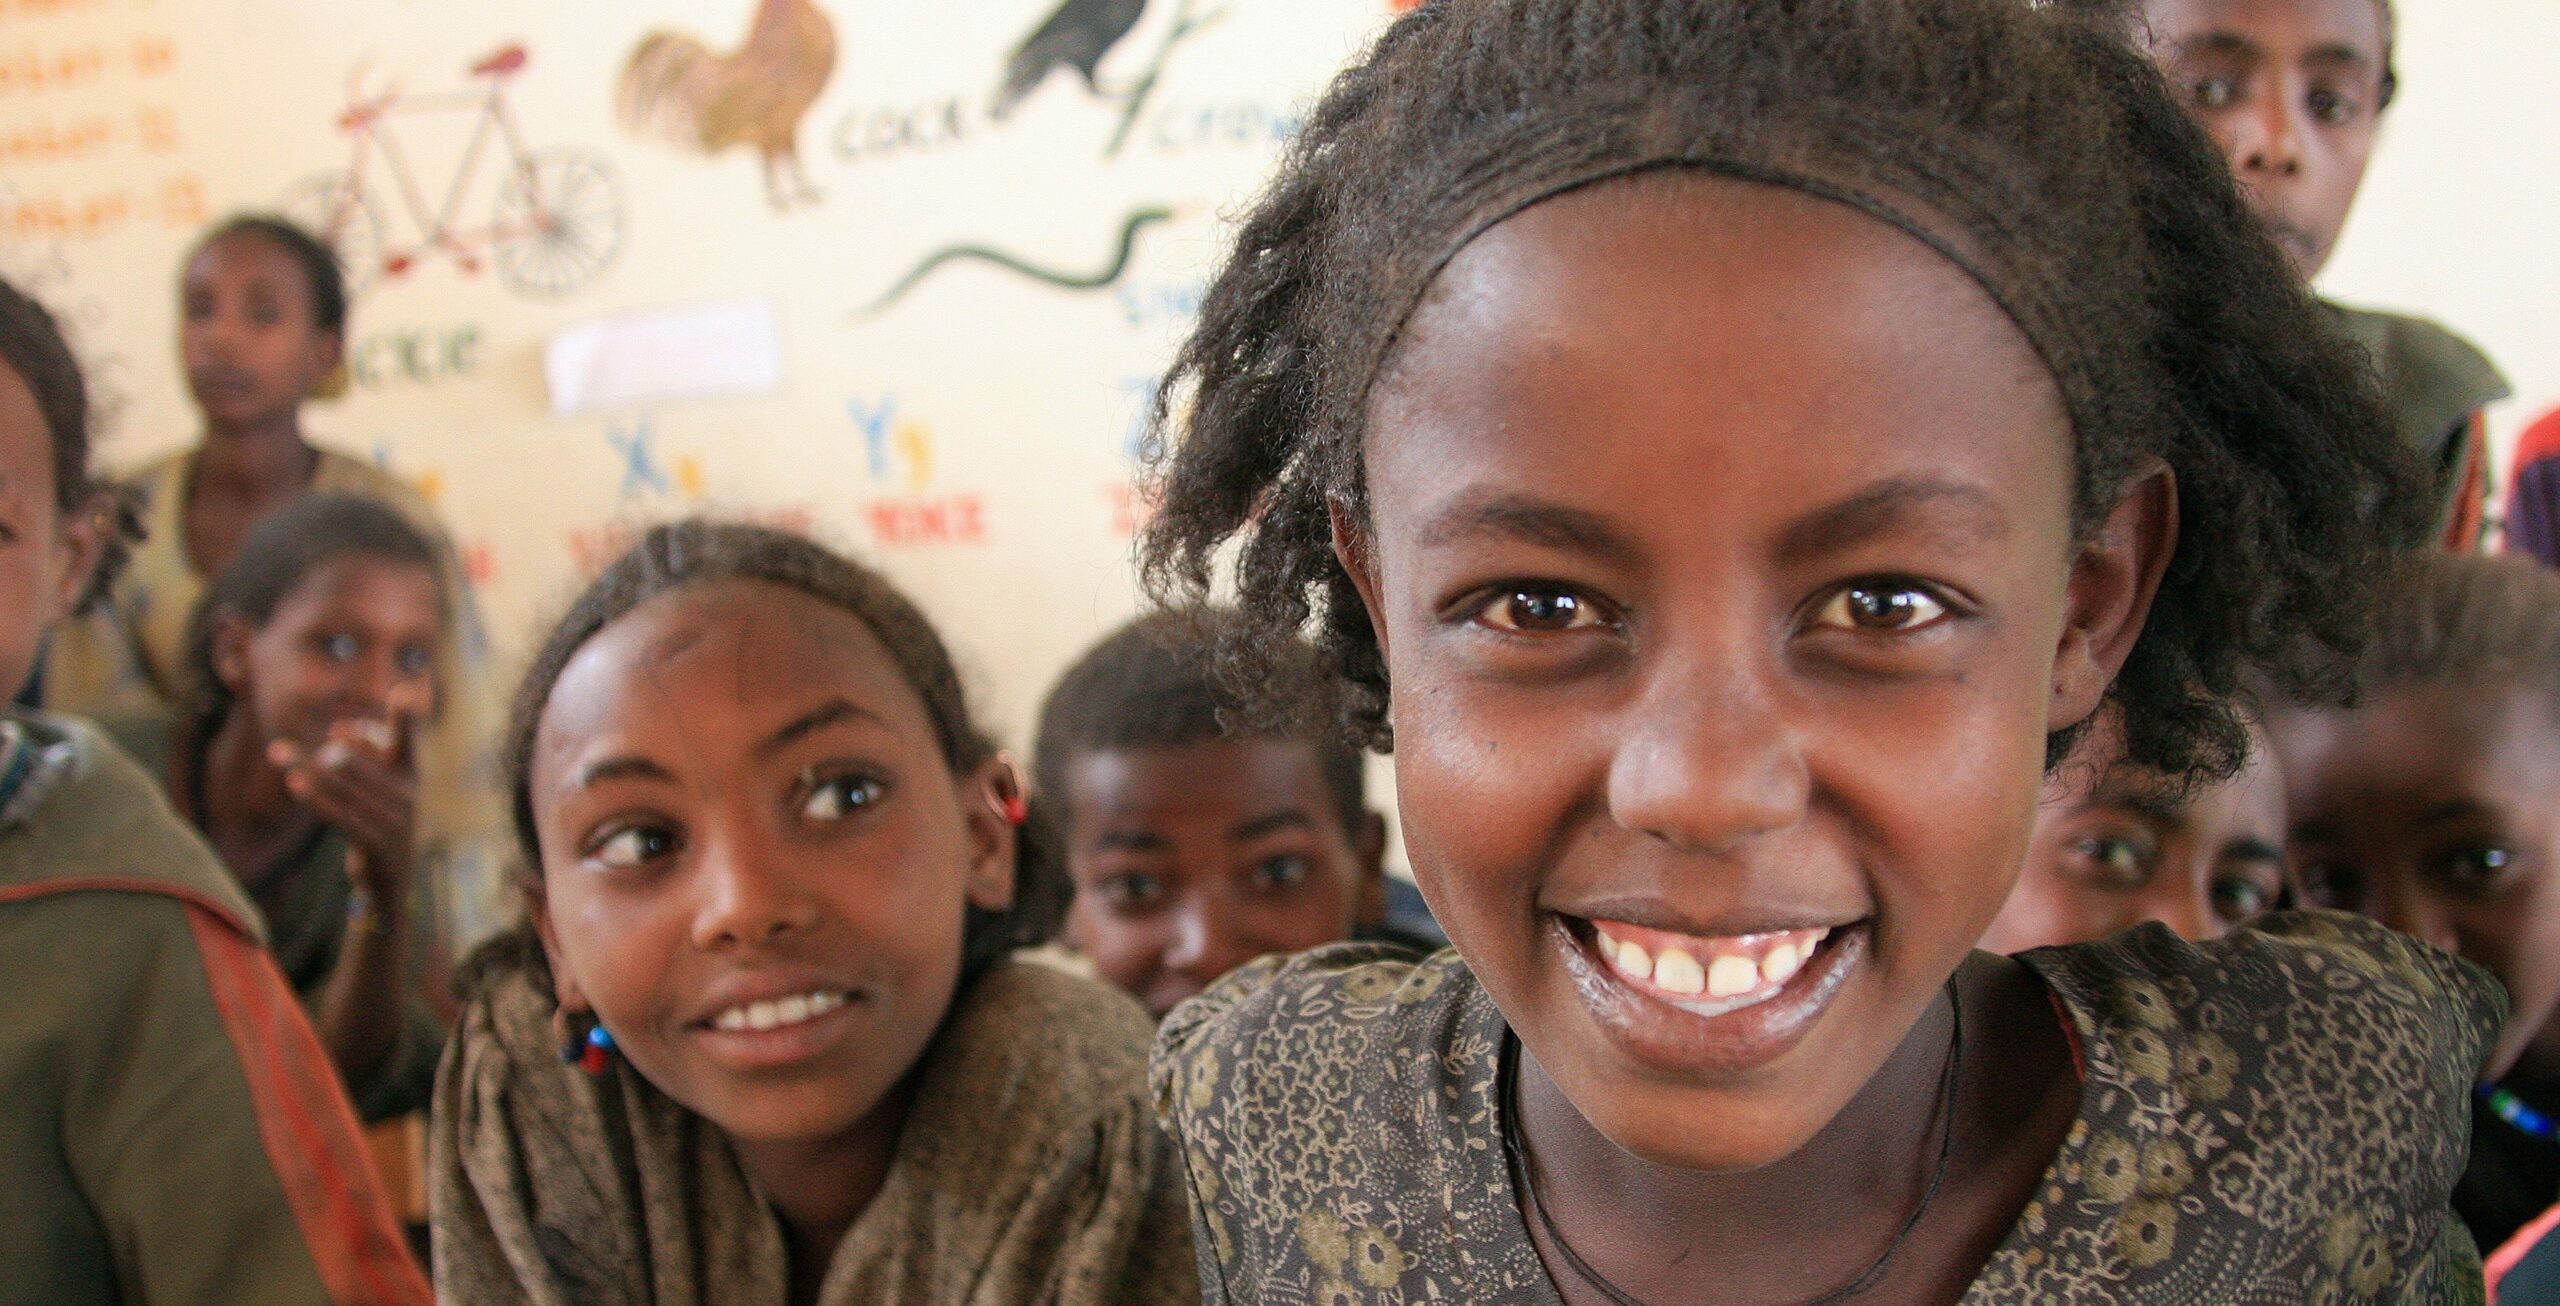 A group of Ethiopian school girls smiling in a classroom